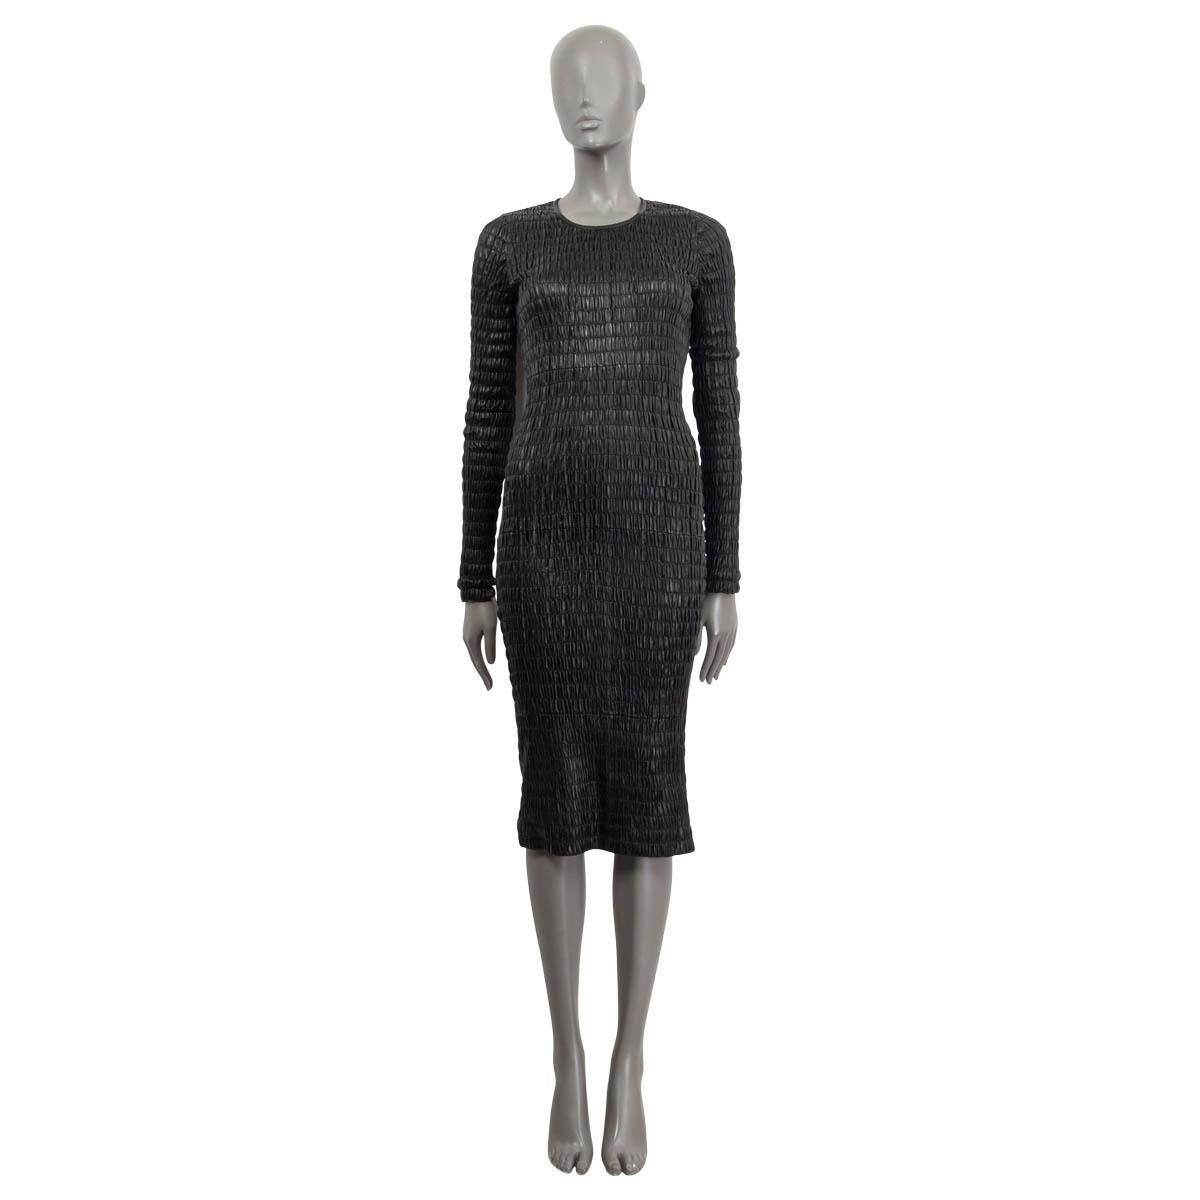 100% authentic Tom Ford smocked long sleeve mid-calf dress in black lamb leather (100%). Opens with an anthracite metallic zipper on the back. Lined in silk (94%) and elastane (6%). Has been tried out once and is in virtually new